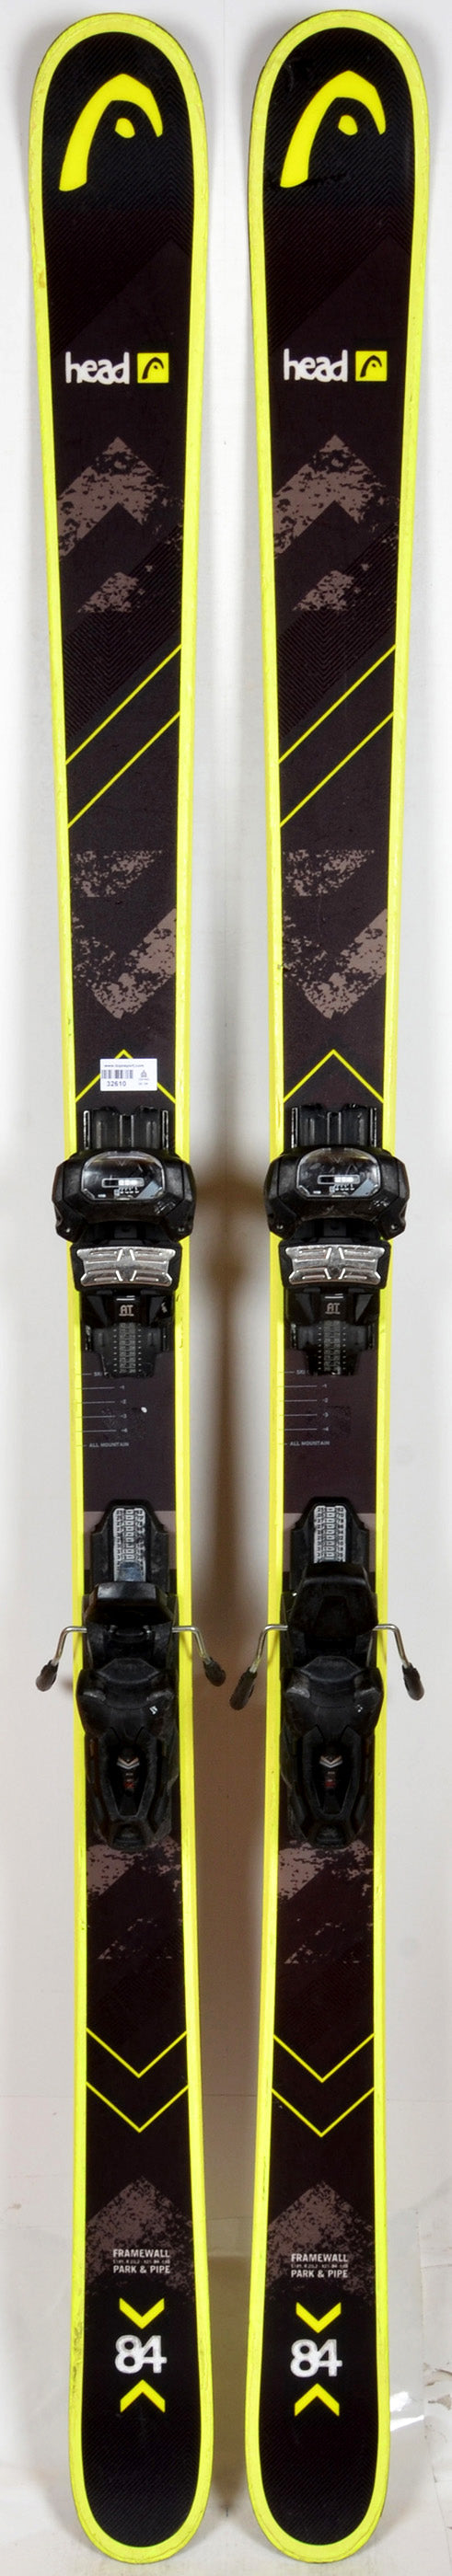 Head FRAME WALL black / yellow - skis d'occasion